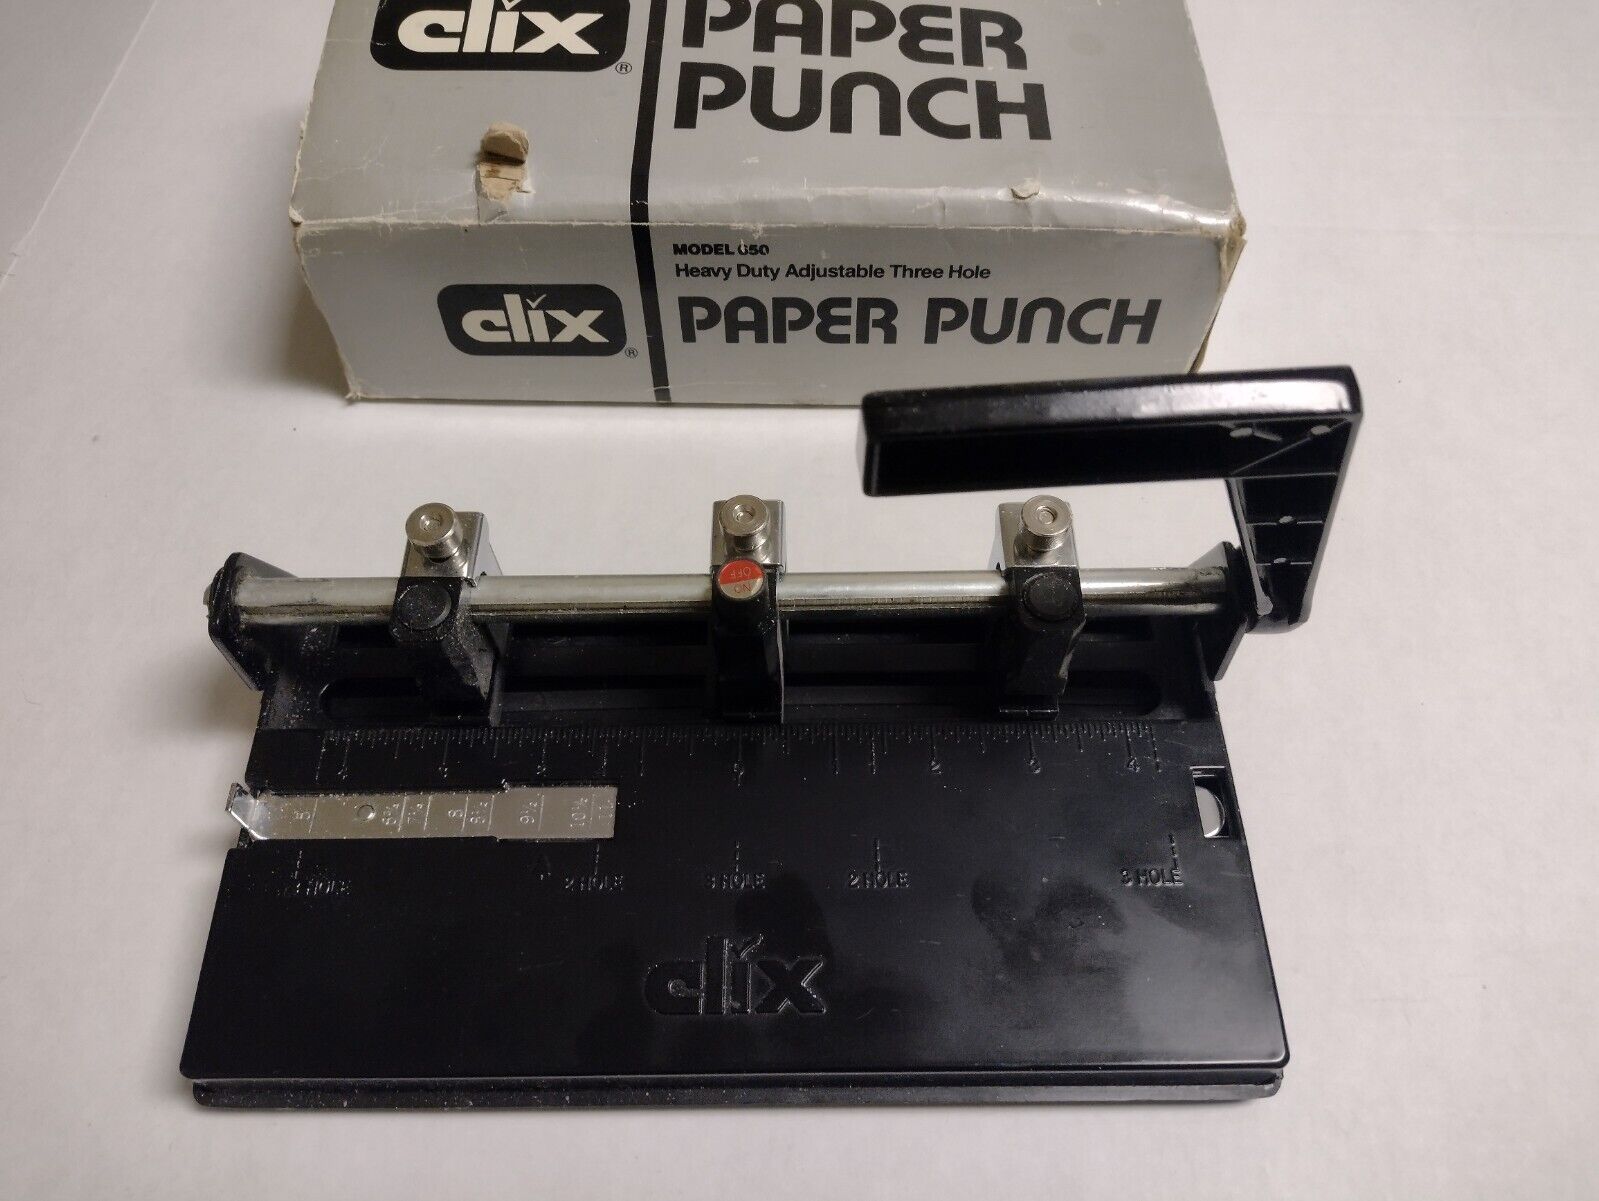 CLIX 650 Heavy Duty Adjustable 3 Hole Metal Paper Punch Vintage